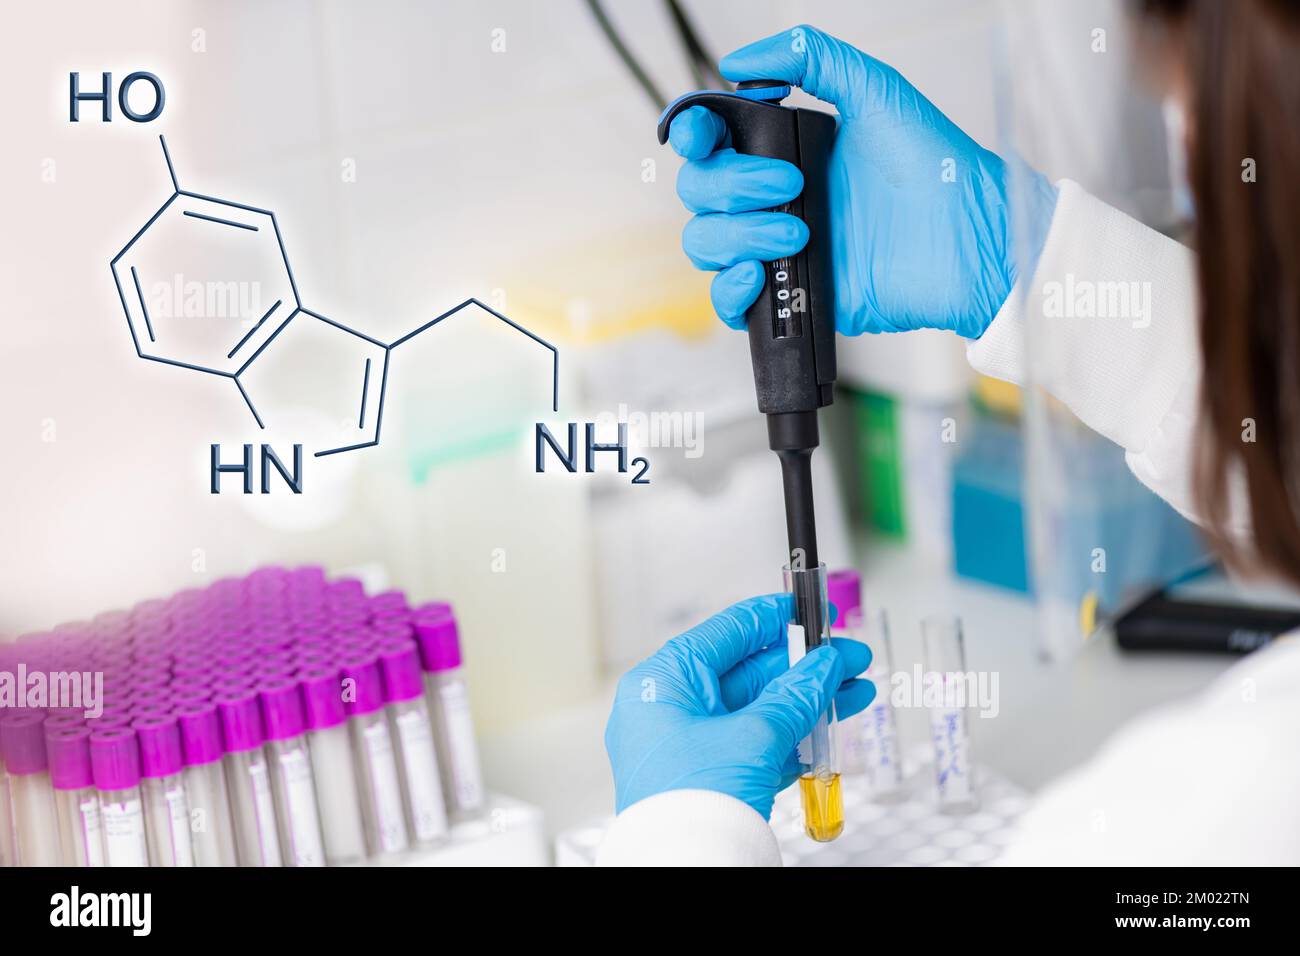 Conceptual image showing pharmaceutical research and the chemical structure of serotonin. Stock Photo